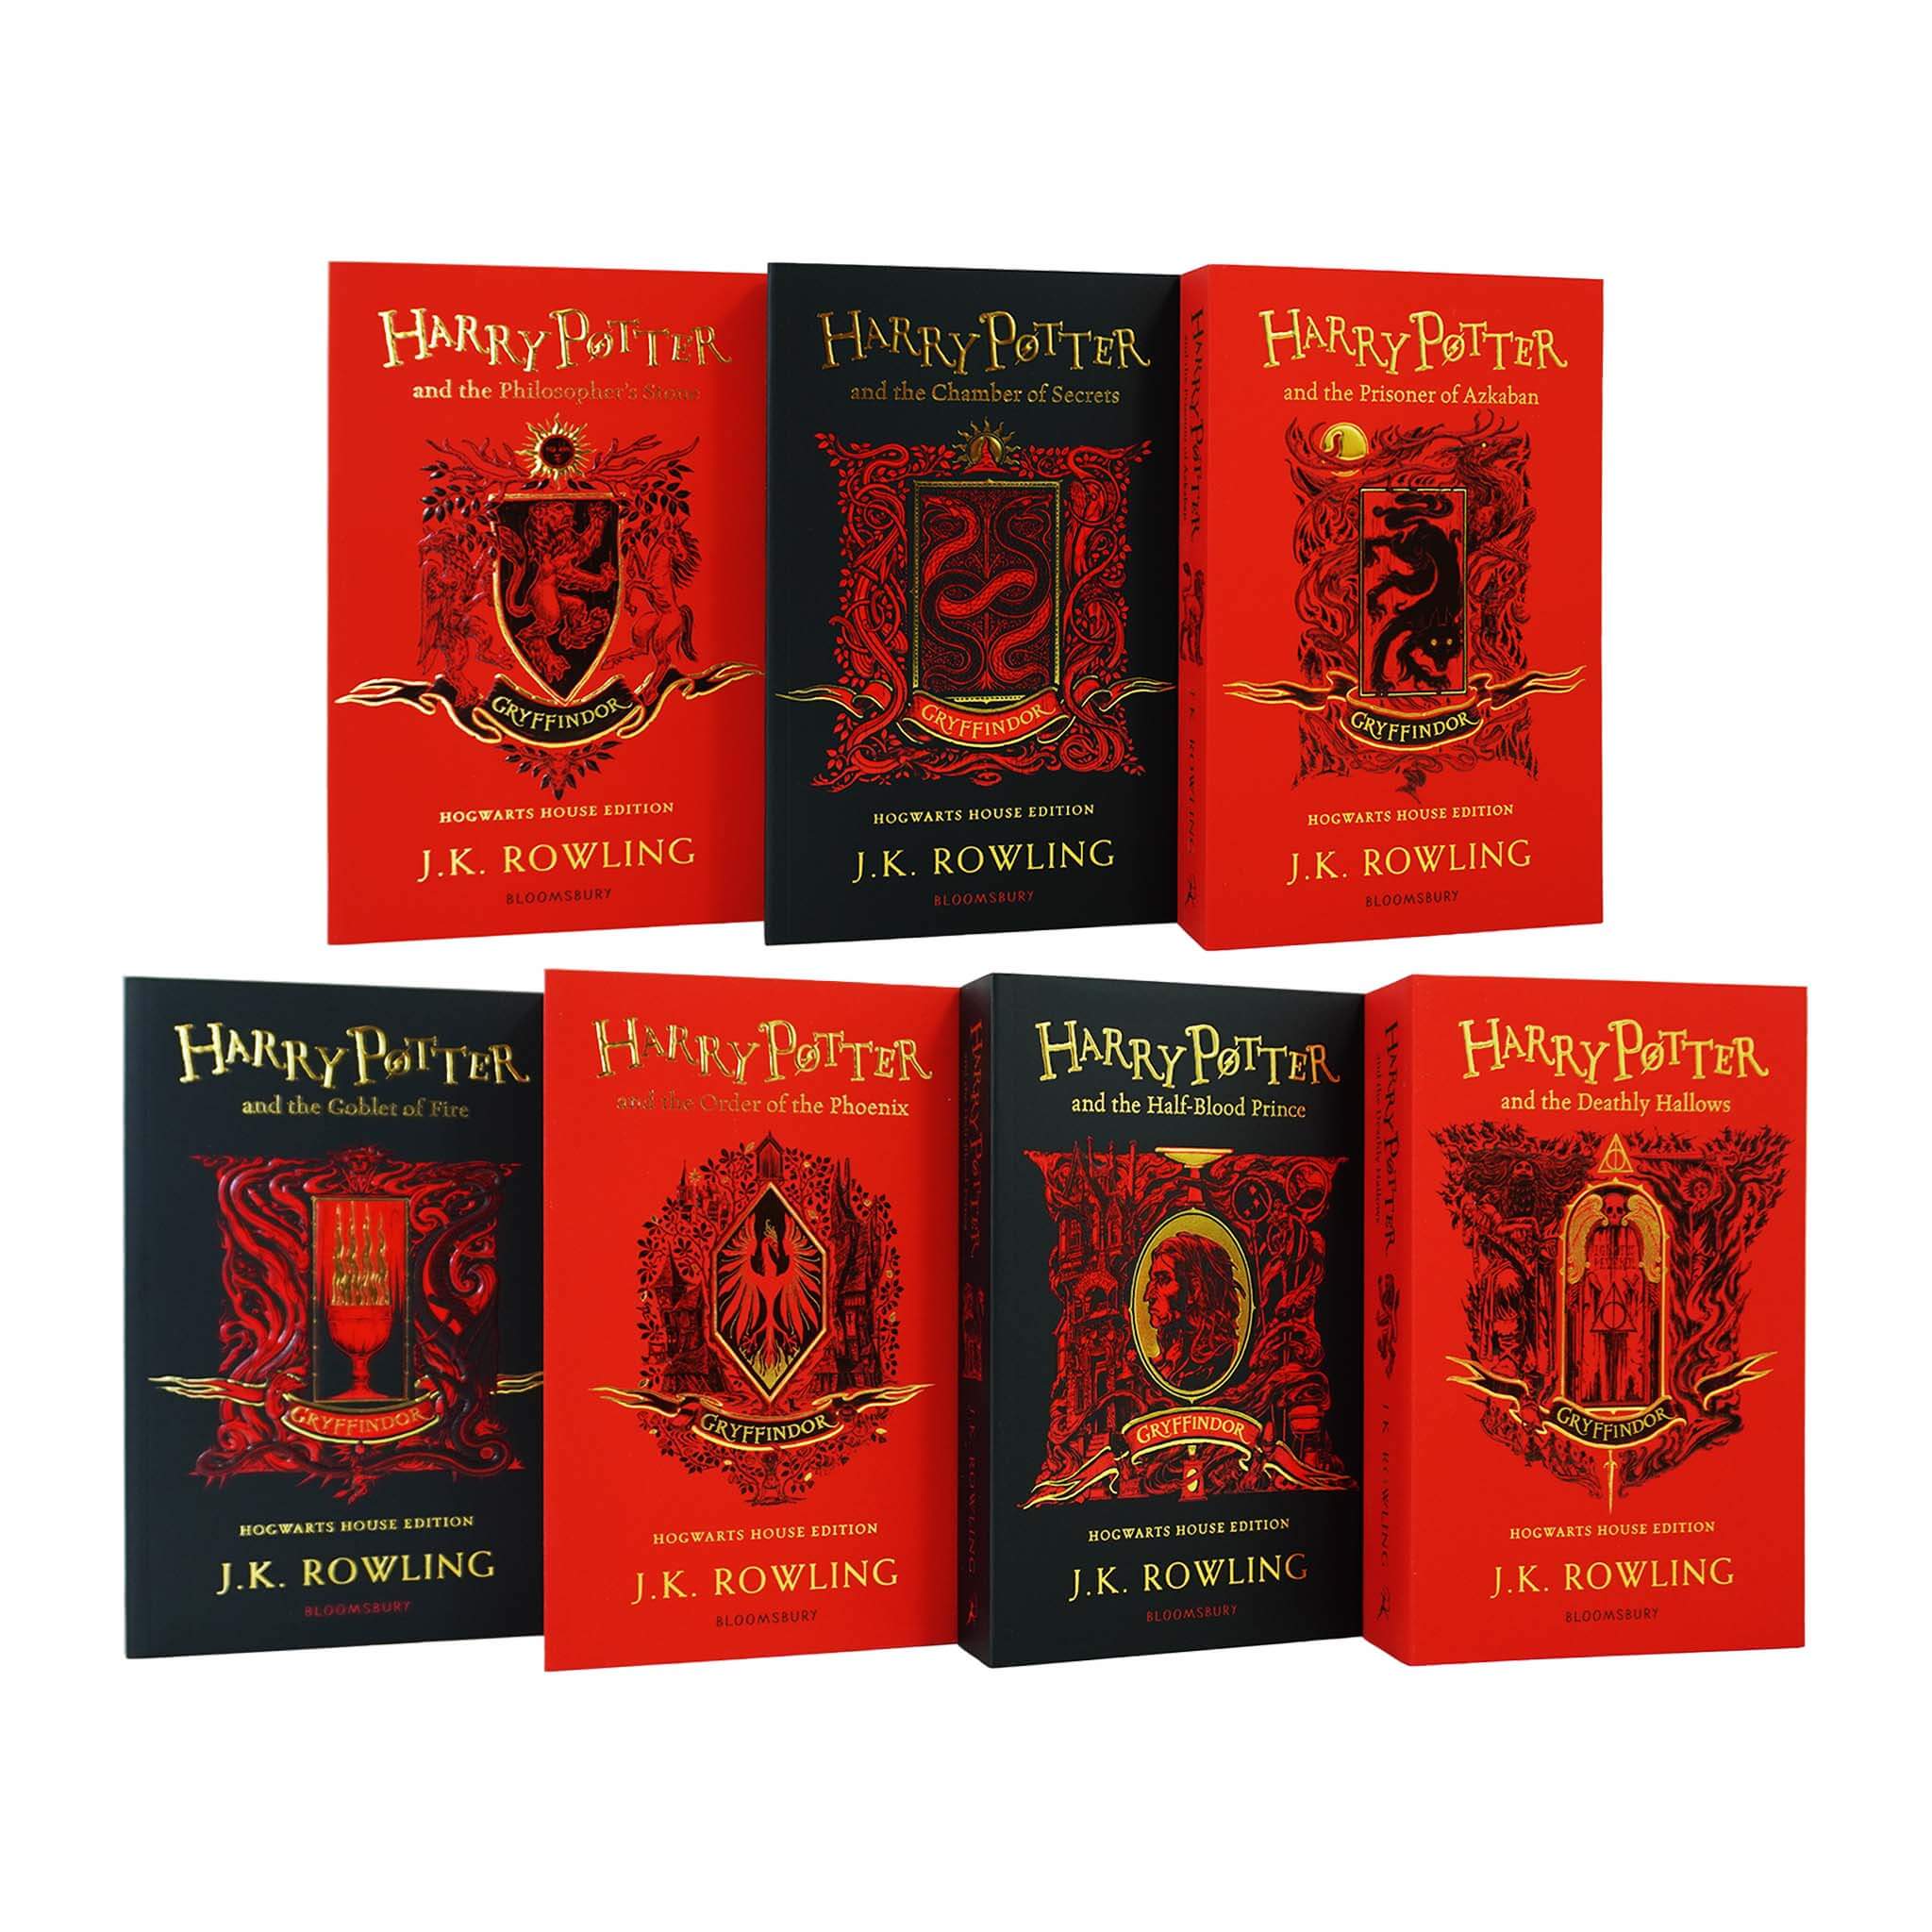 Harry Potter: Hogwarts House Editions - Gryffindor 7 Books Box Set by J.K. Rowling - Ages 9+ - Paperback